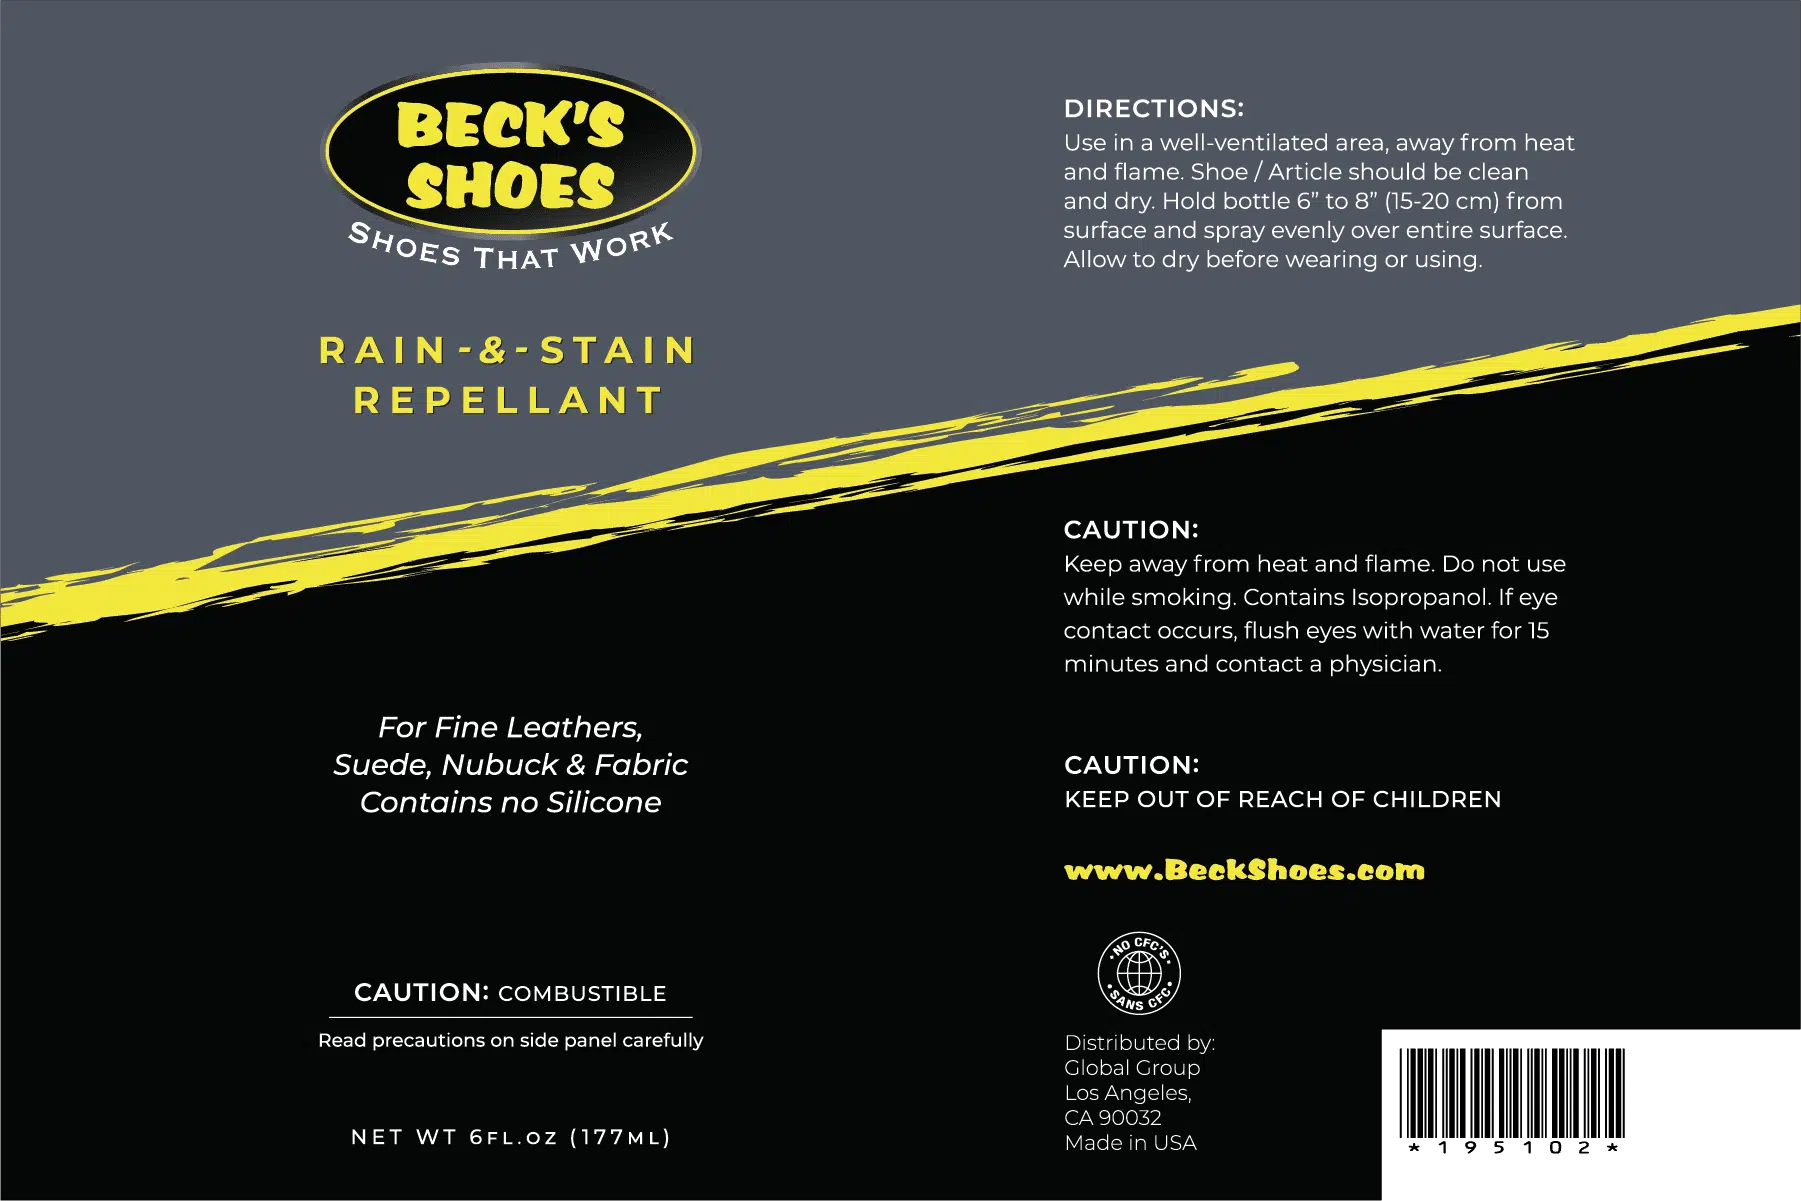 Beck's Shoes Rain and Stain Repellant 195102 - Shoe Care Label